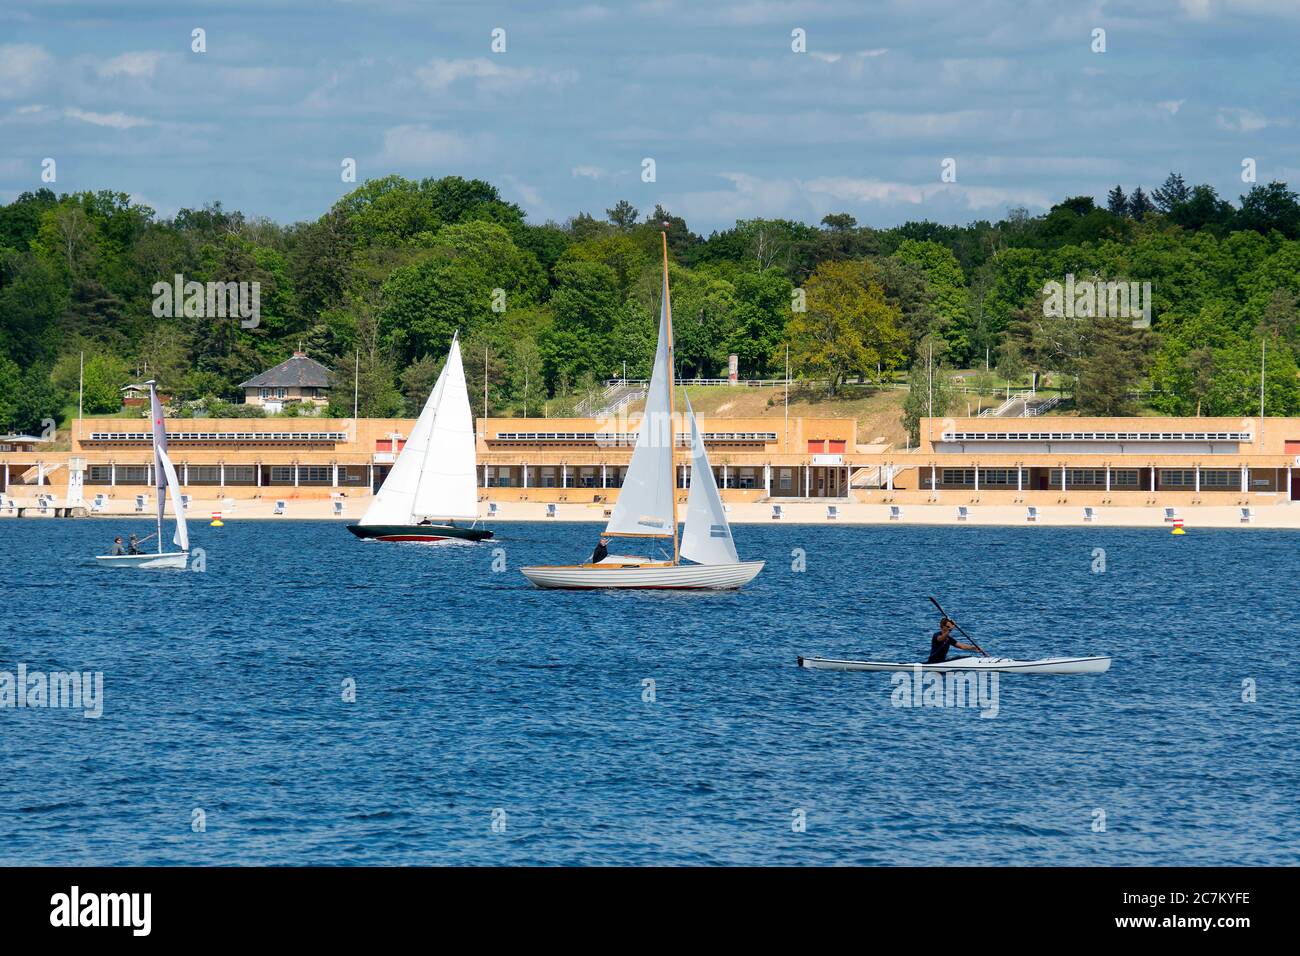 Berlin, Wannsee, view to the Wannsee lido, sailing boats and paddle boat Stock Photo